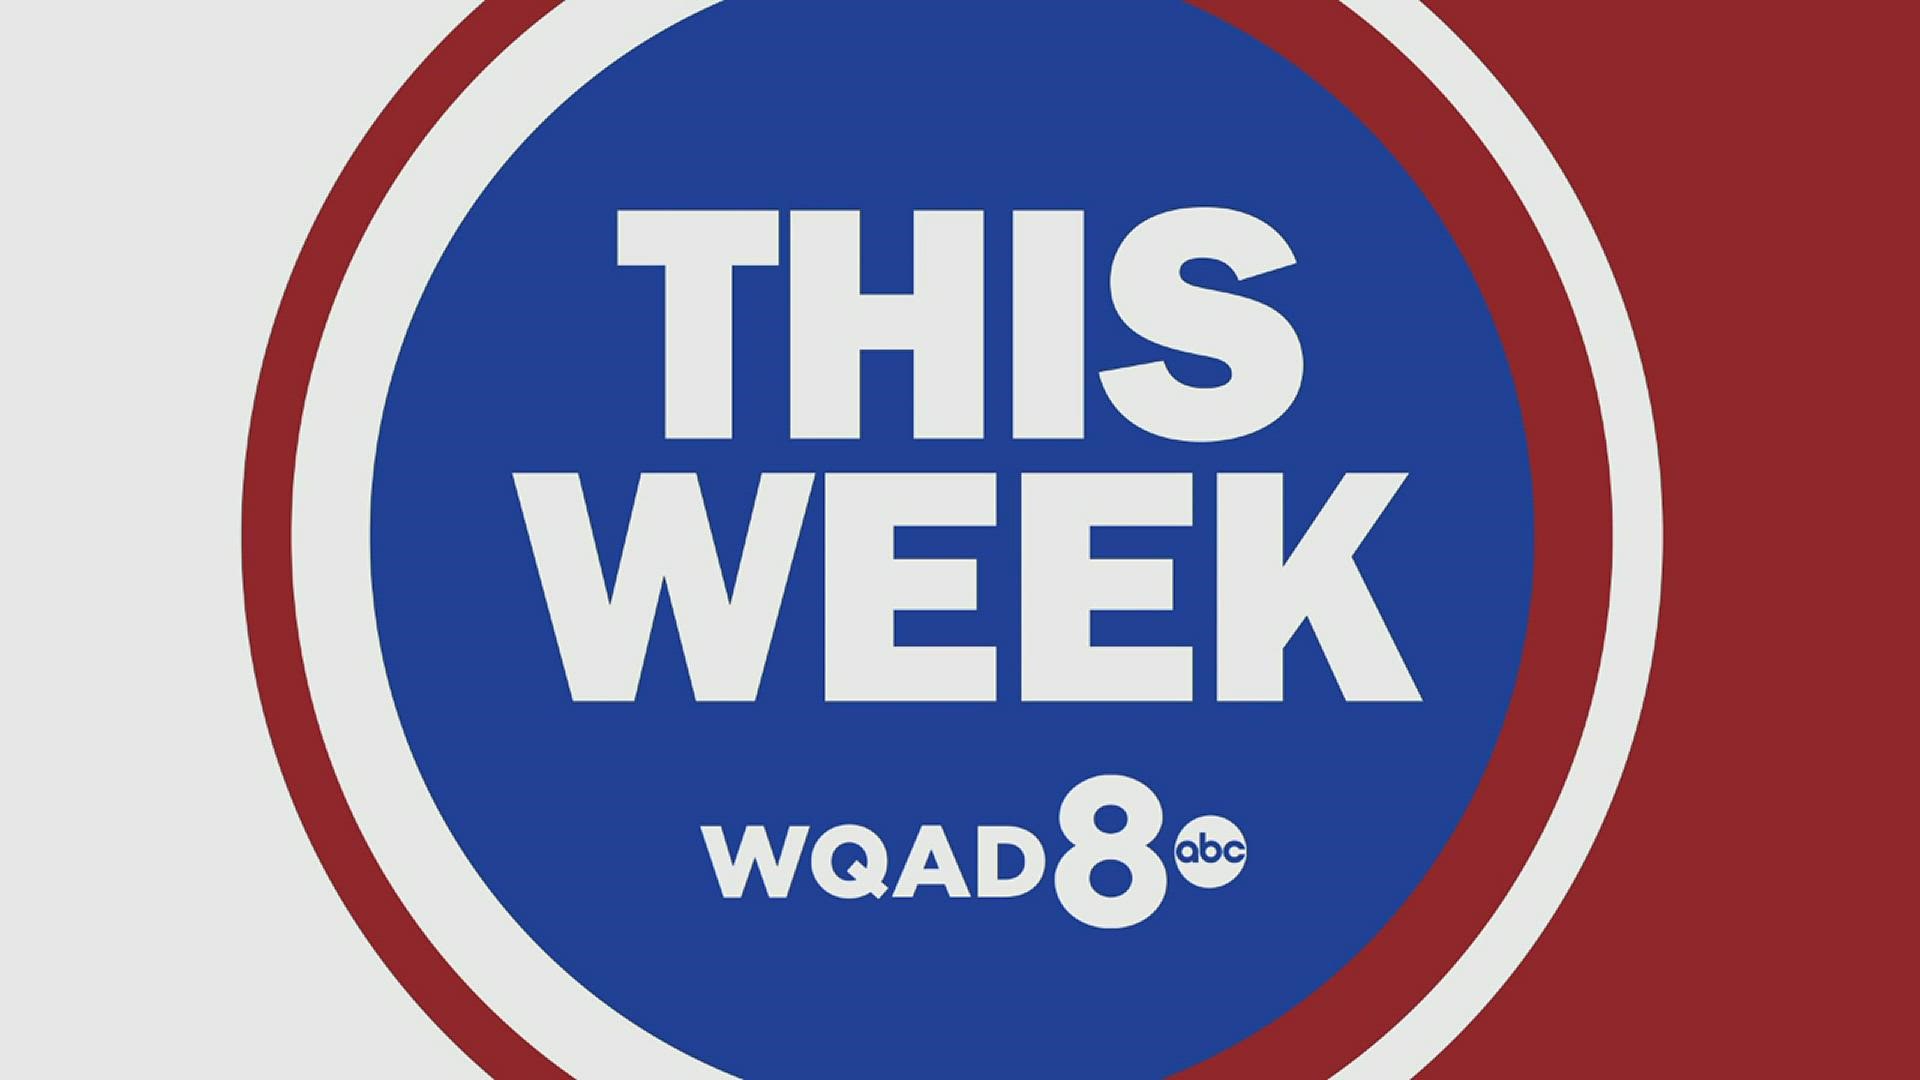 News 8's Jon Diaz recaps the week's biggest stories. This week, WQAD examines a Whiteside County child sexual abuse case that has the community seeking answers.